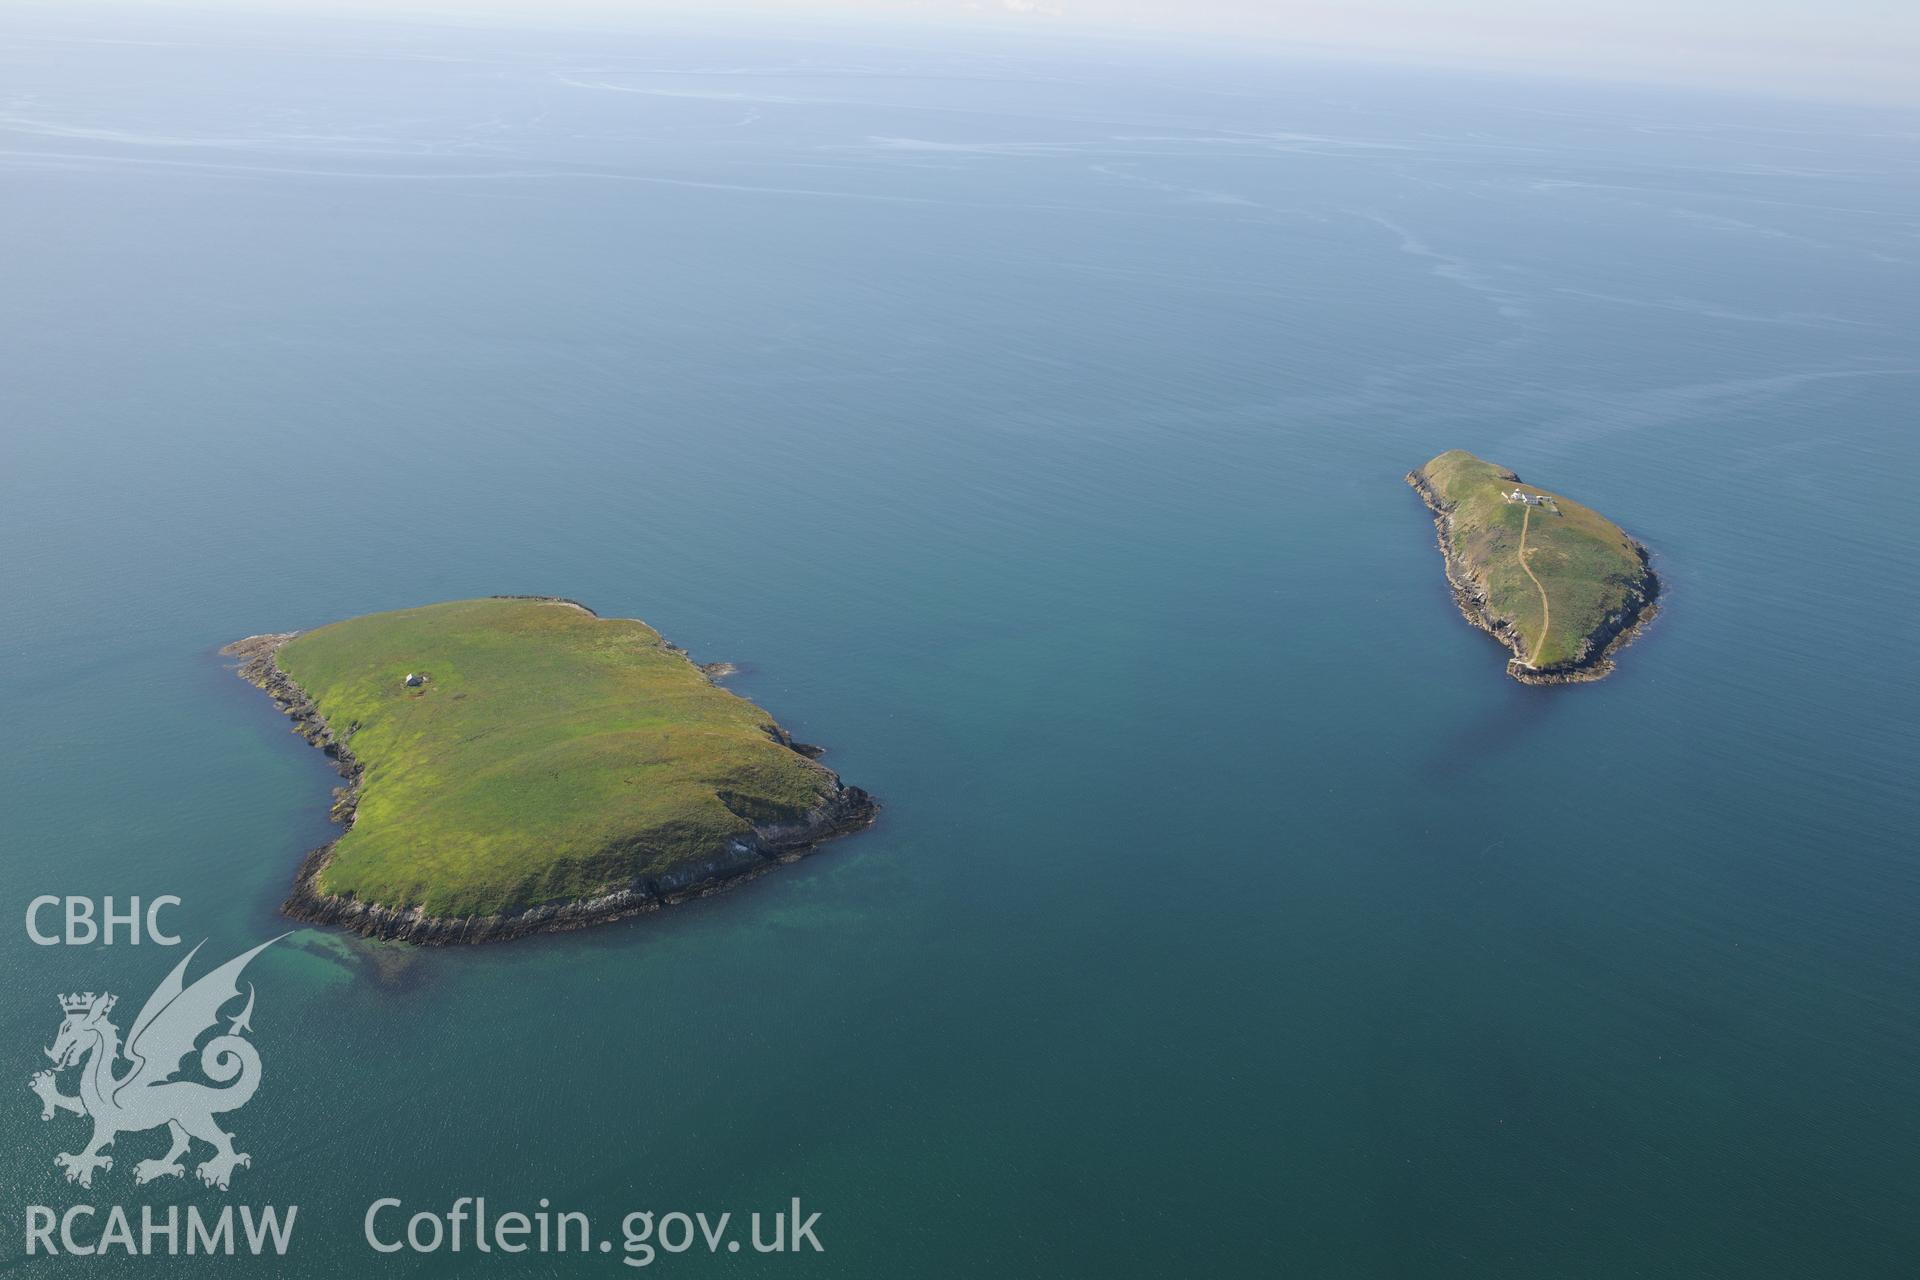 Chapel building on St. Tudwal's Island East, fishtrap off its coast, and lighthouse on St. Tudwal's Island West. Oblique aerial photograph taken during the Royal Commission's programme of archaeological aerial reconnaissance by Toby Driver on 23/06/2015.